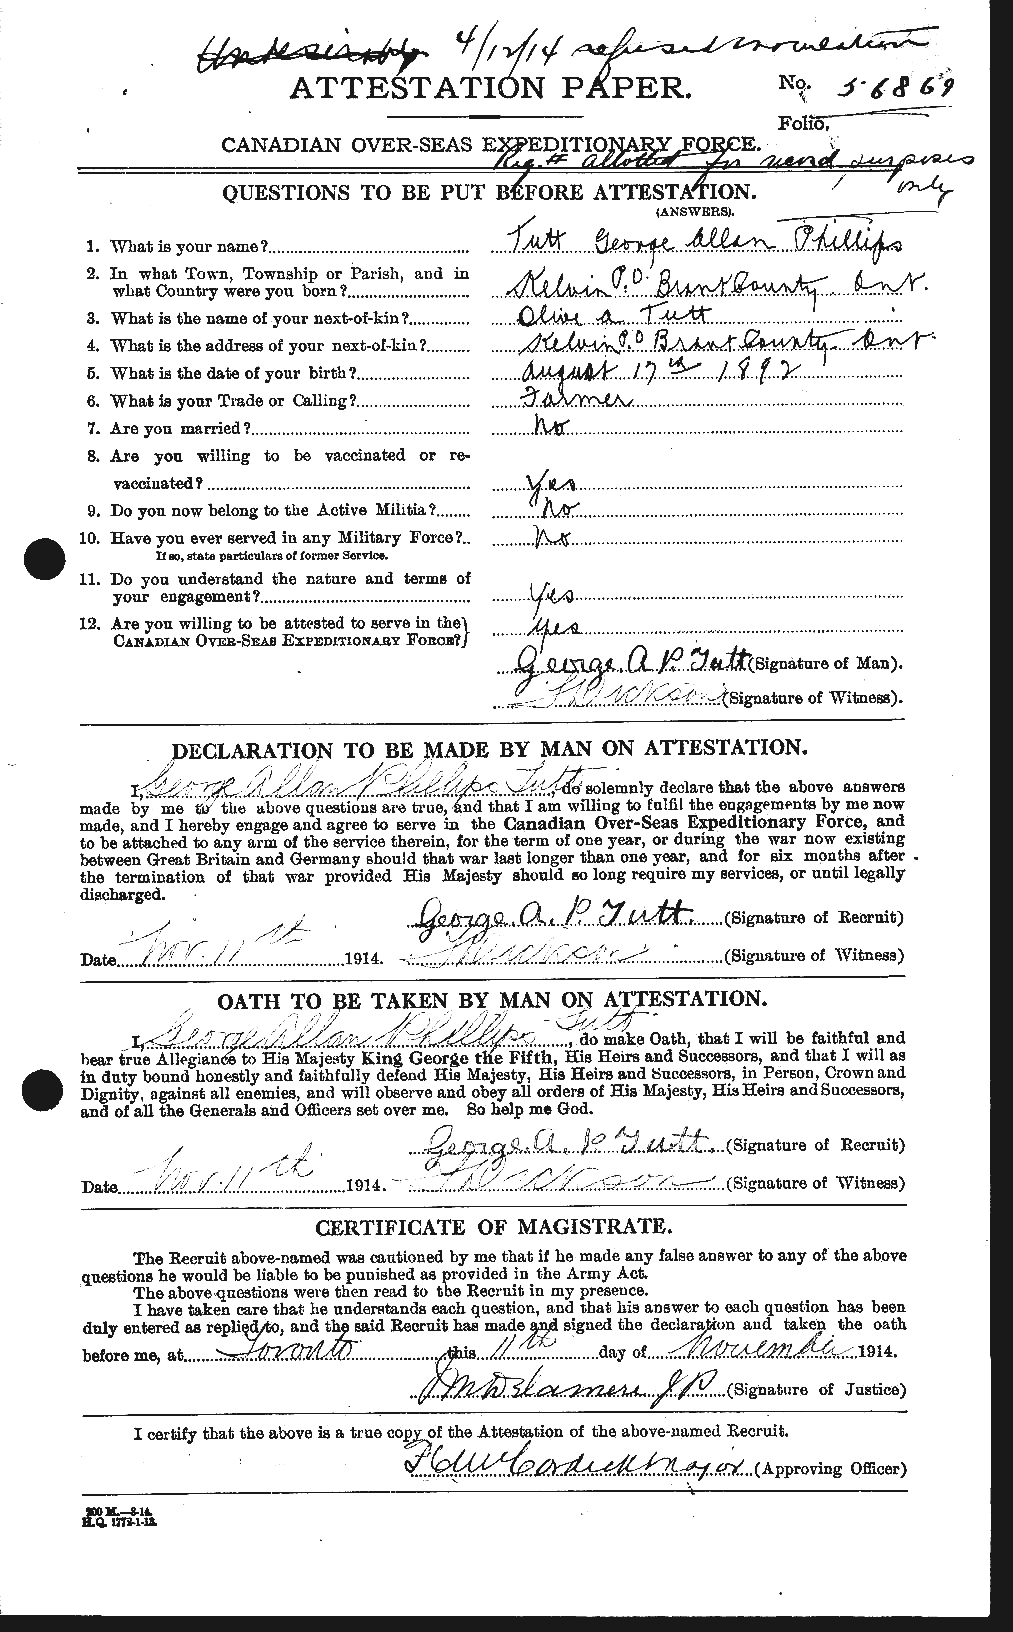 Personnel Records of the First World War - CEF 645334a